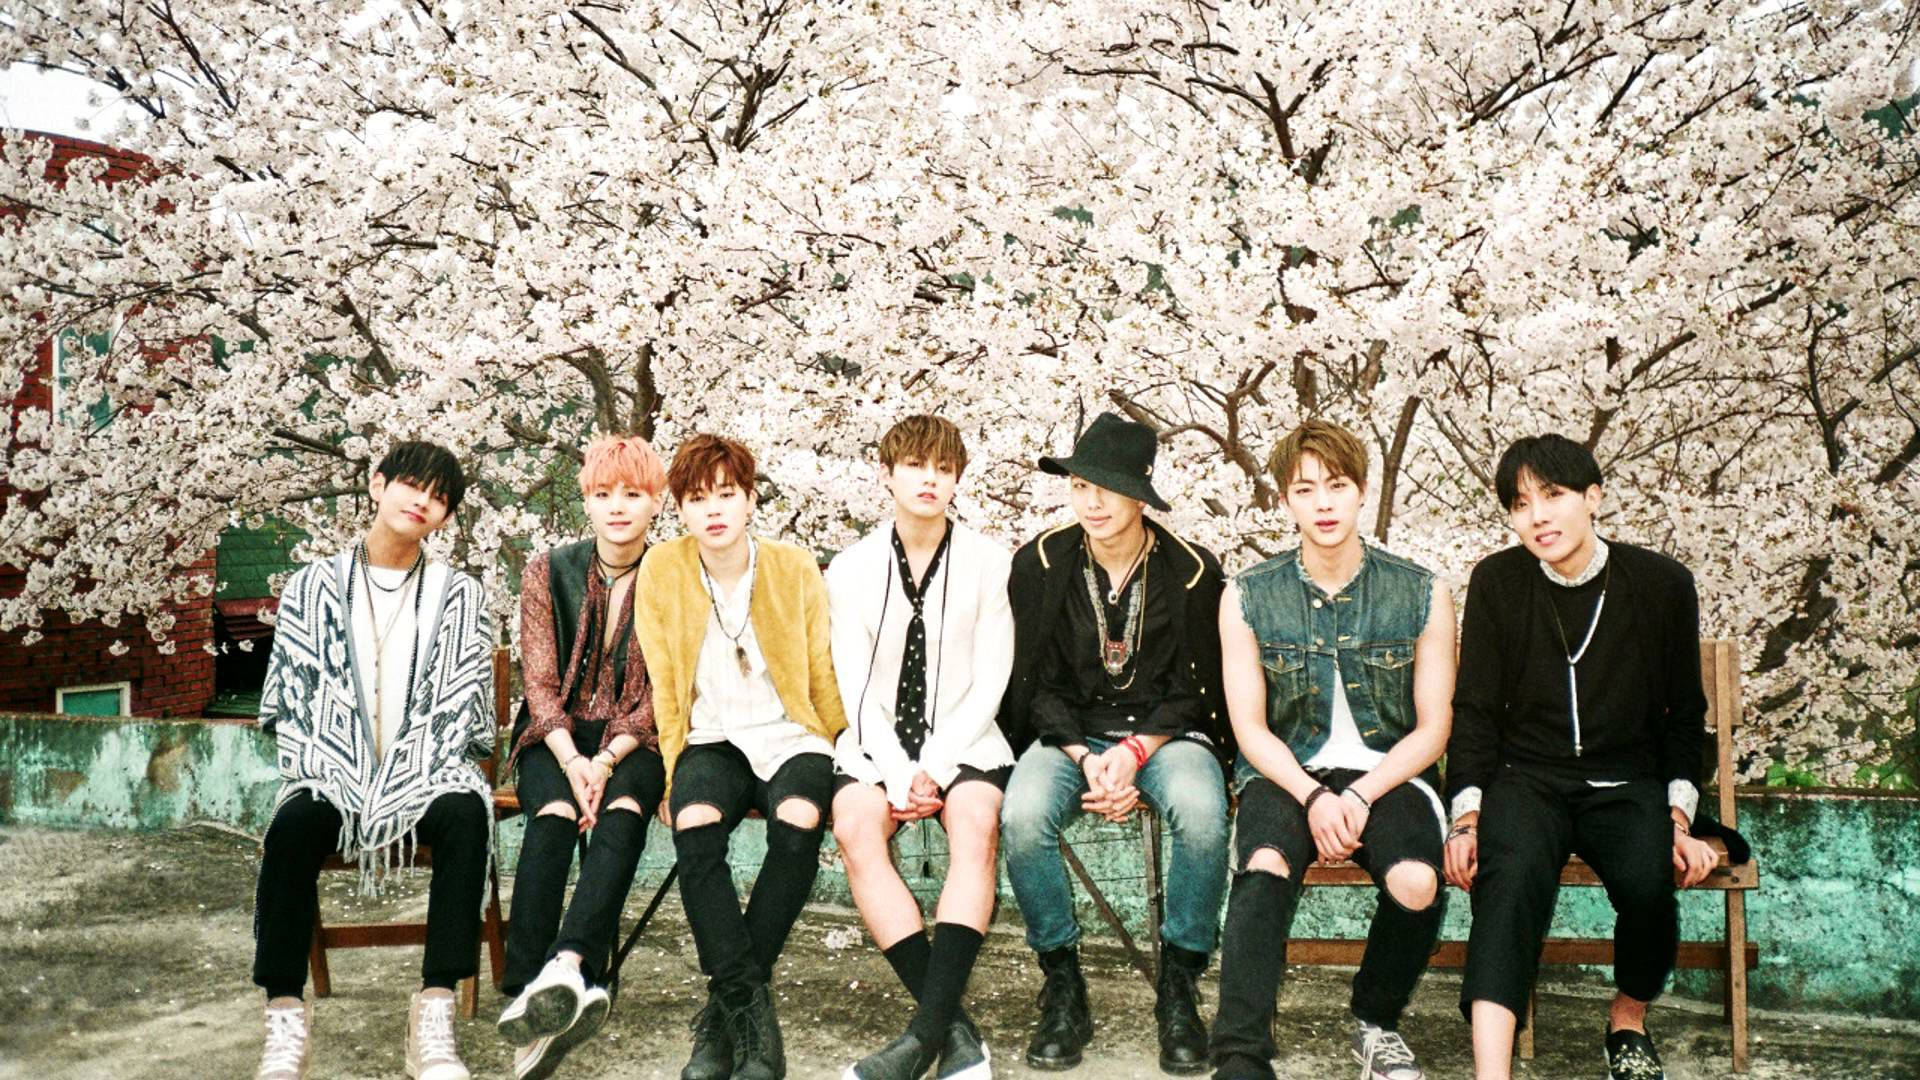 Bts With Cherry Blossoms Background